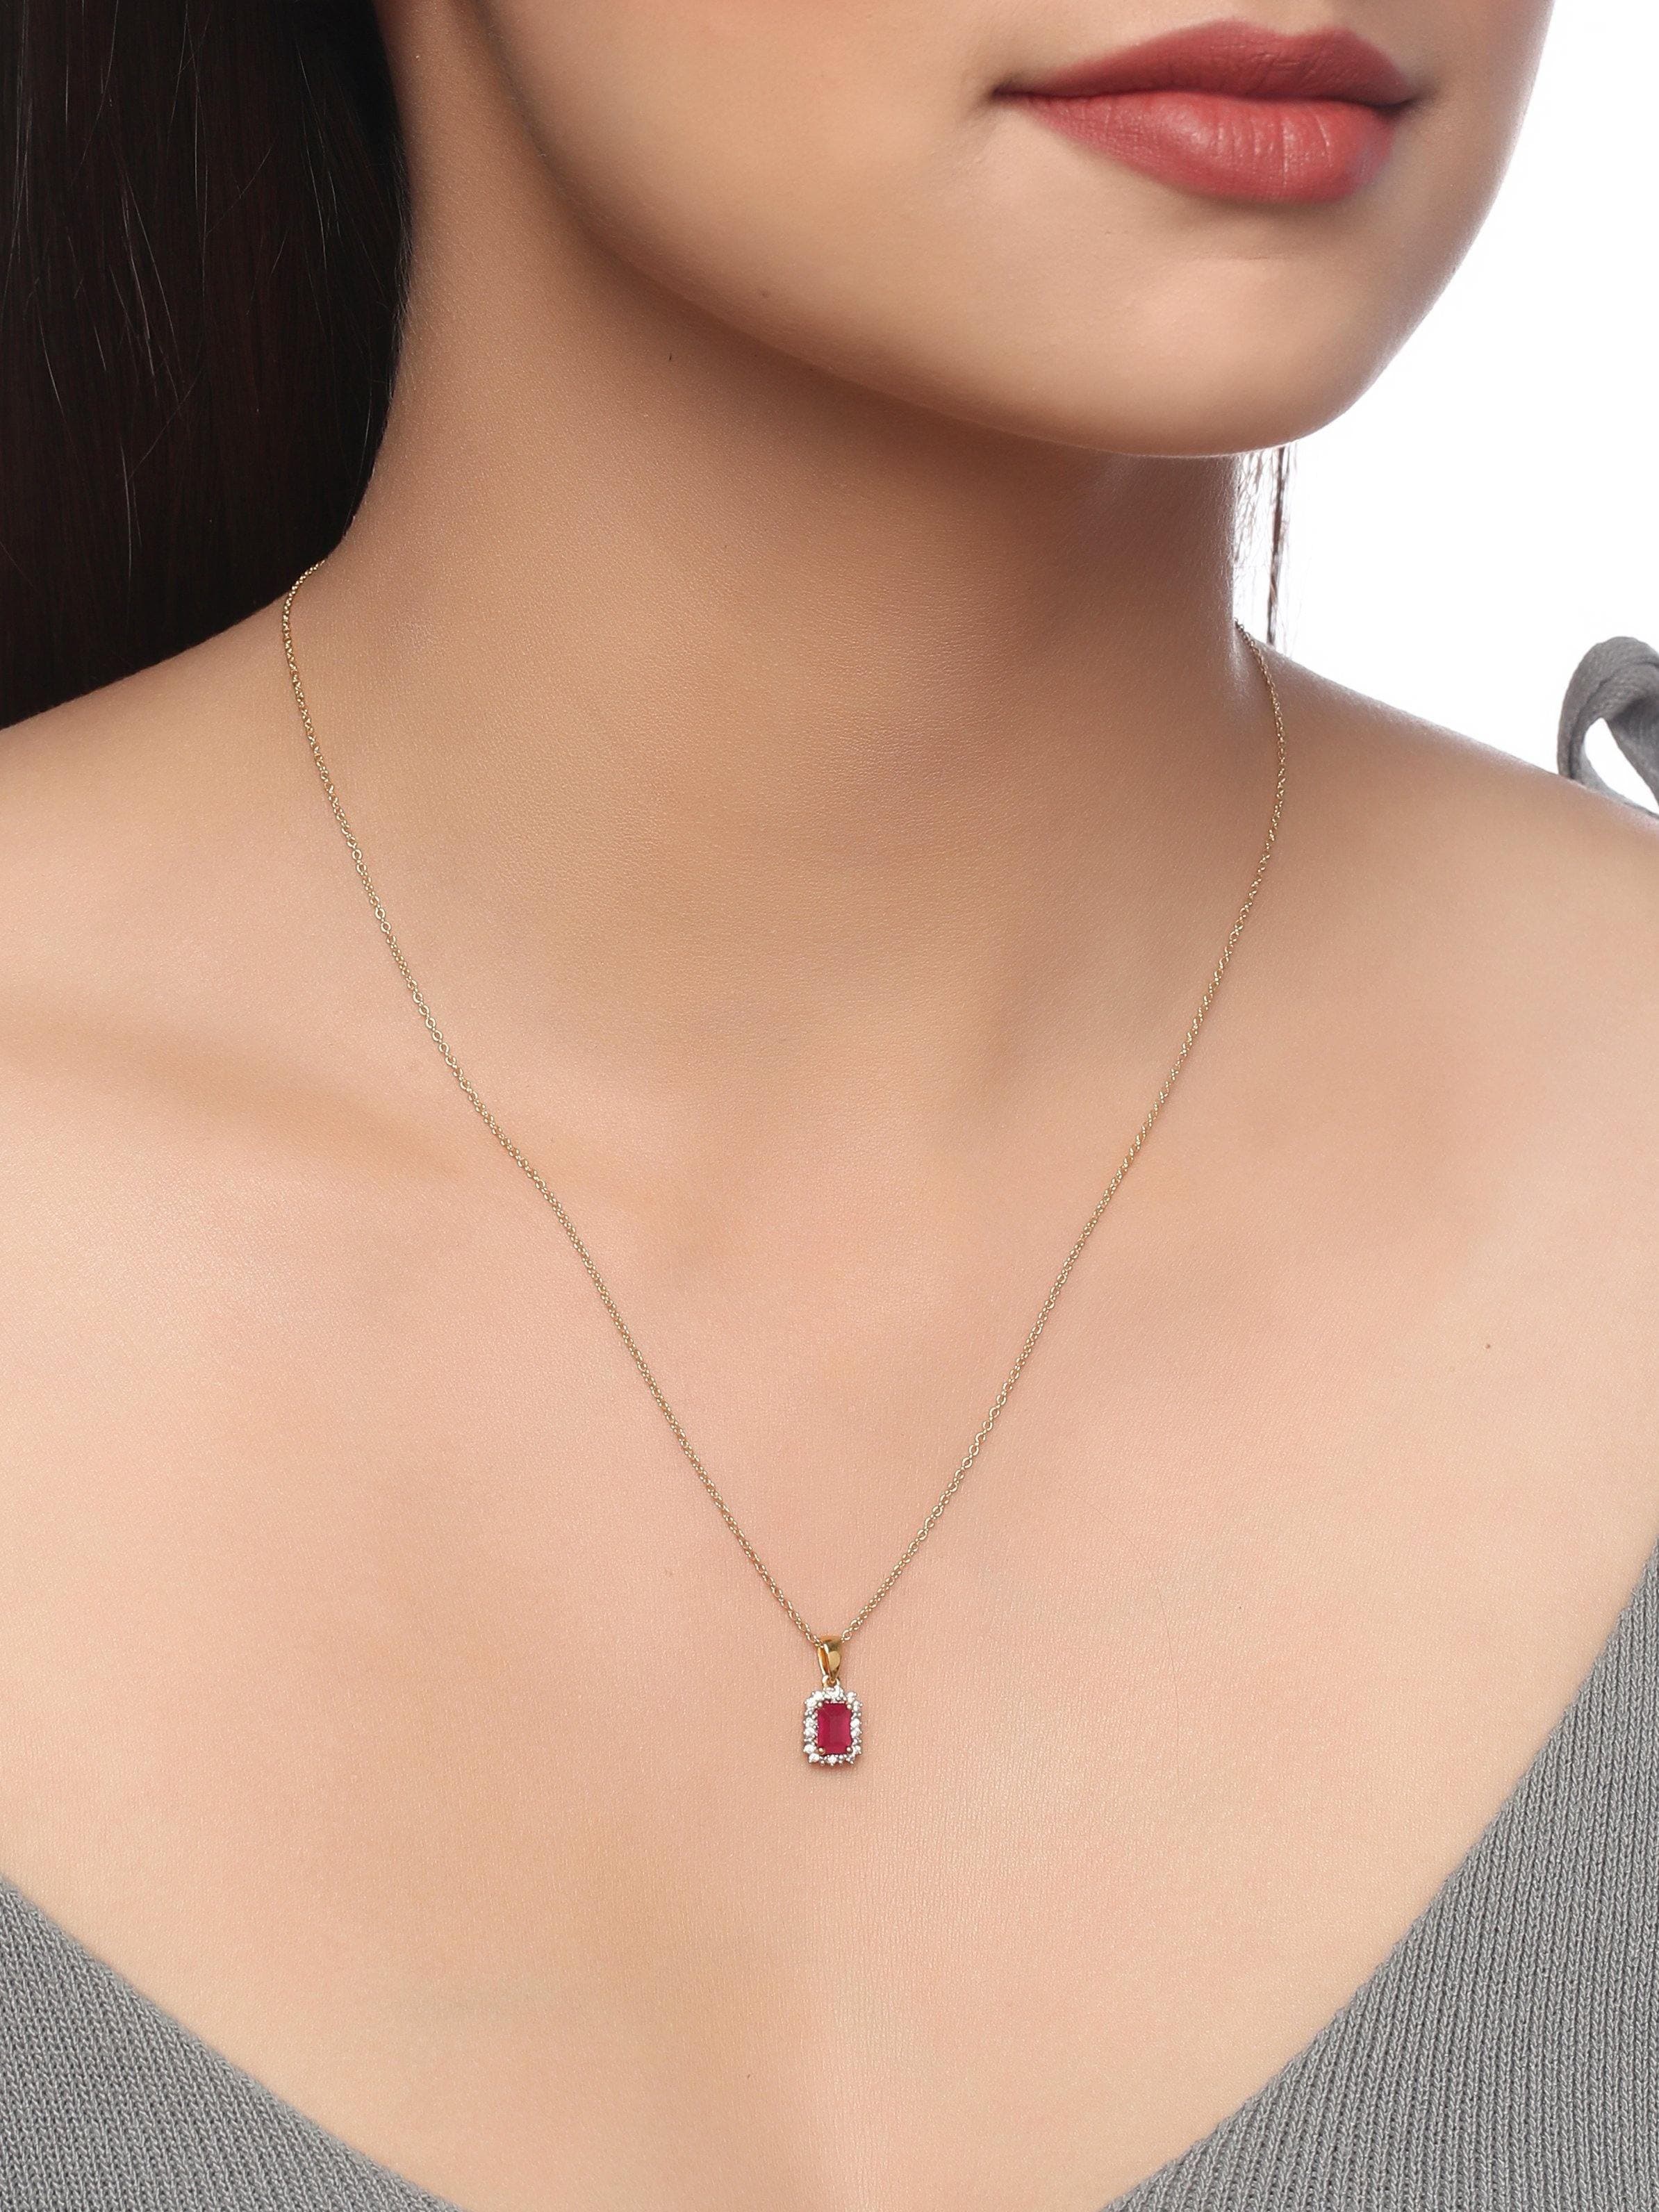 0.73 Ct. Glass Filled Ruby Solid 10k Yellow Gold Chain Pendant Necklace Jewelry - YoTreasure